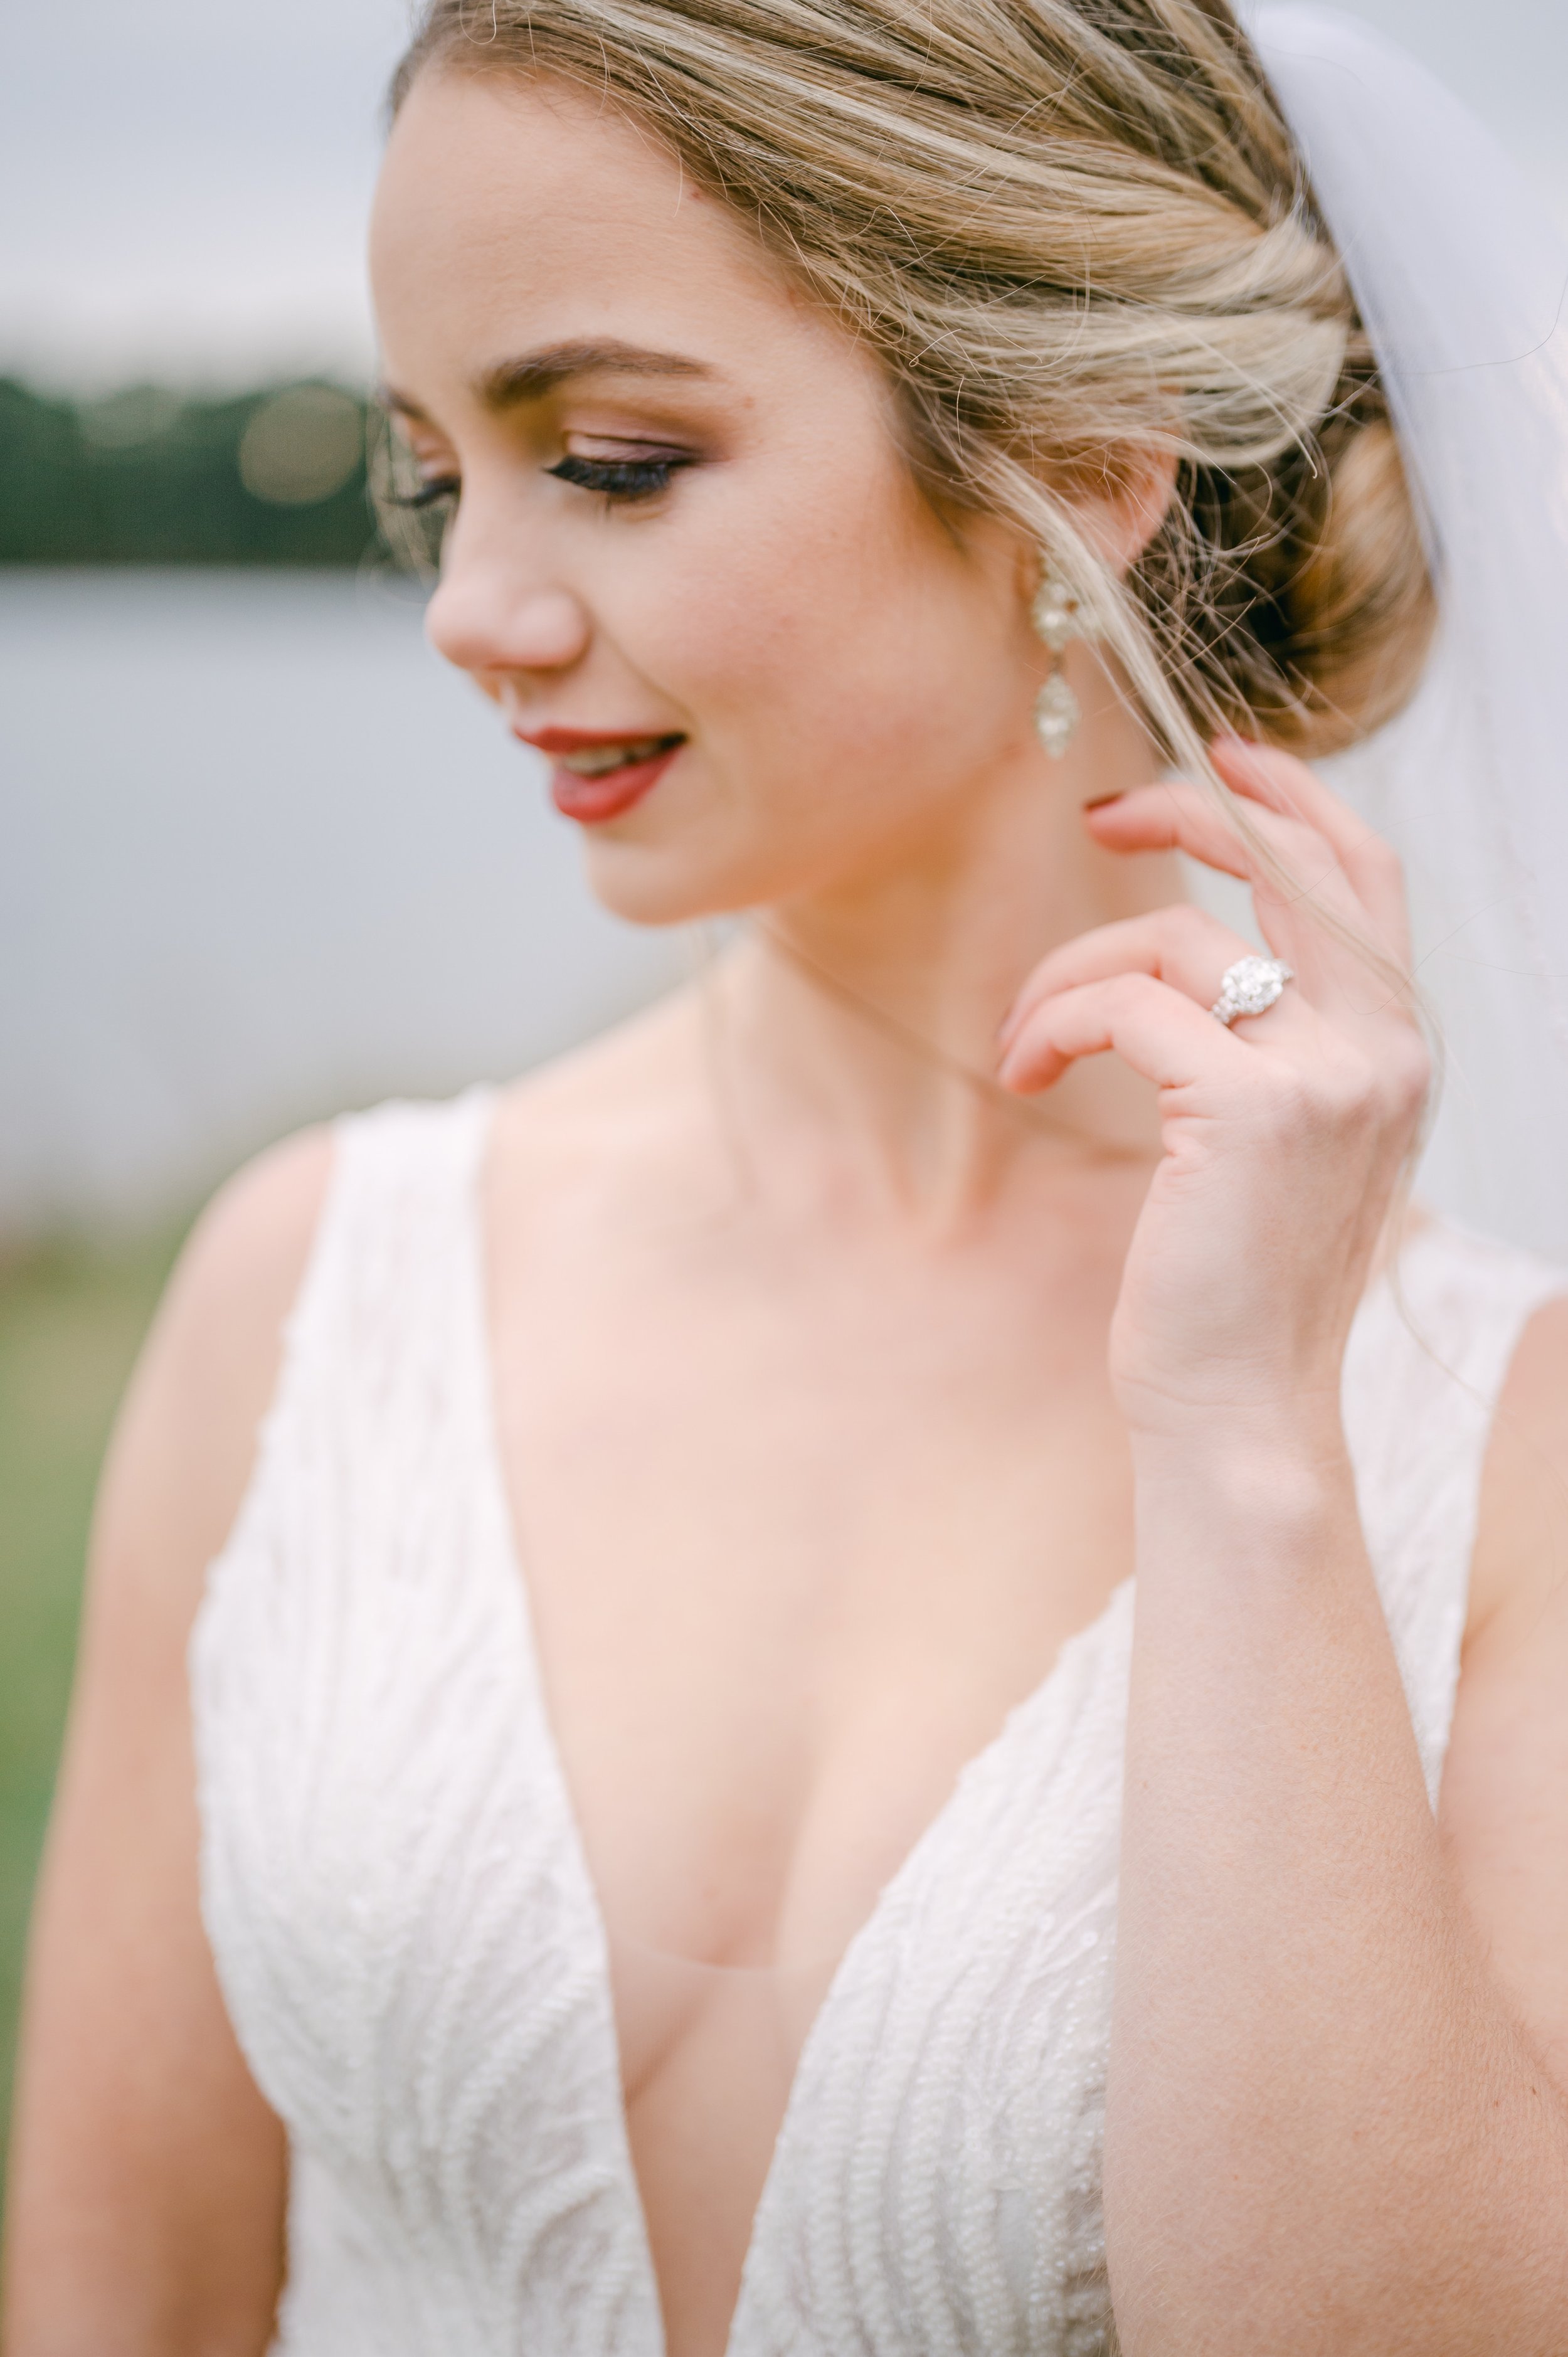 ivory-and-beau-bride-taylor-real-bride-ryder-made-with-love-wedding-dress-bridal-gown-wedding-gown-classic-bride-savannah-bridal-shop-bridal-boutique-bridal-shopping-bridal-style-bridal-inspo-2021-11-6 Taylor-and-Ben-Augusta-Wedding-Photographer139.jpg